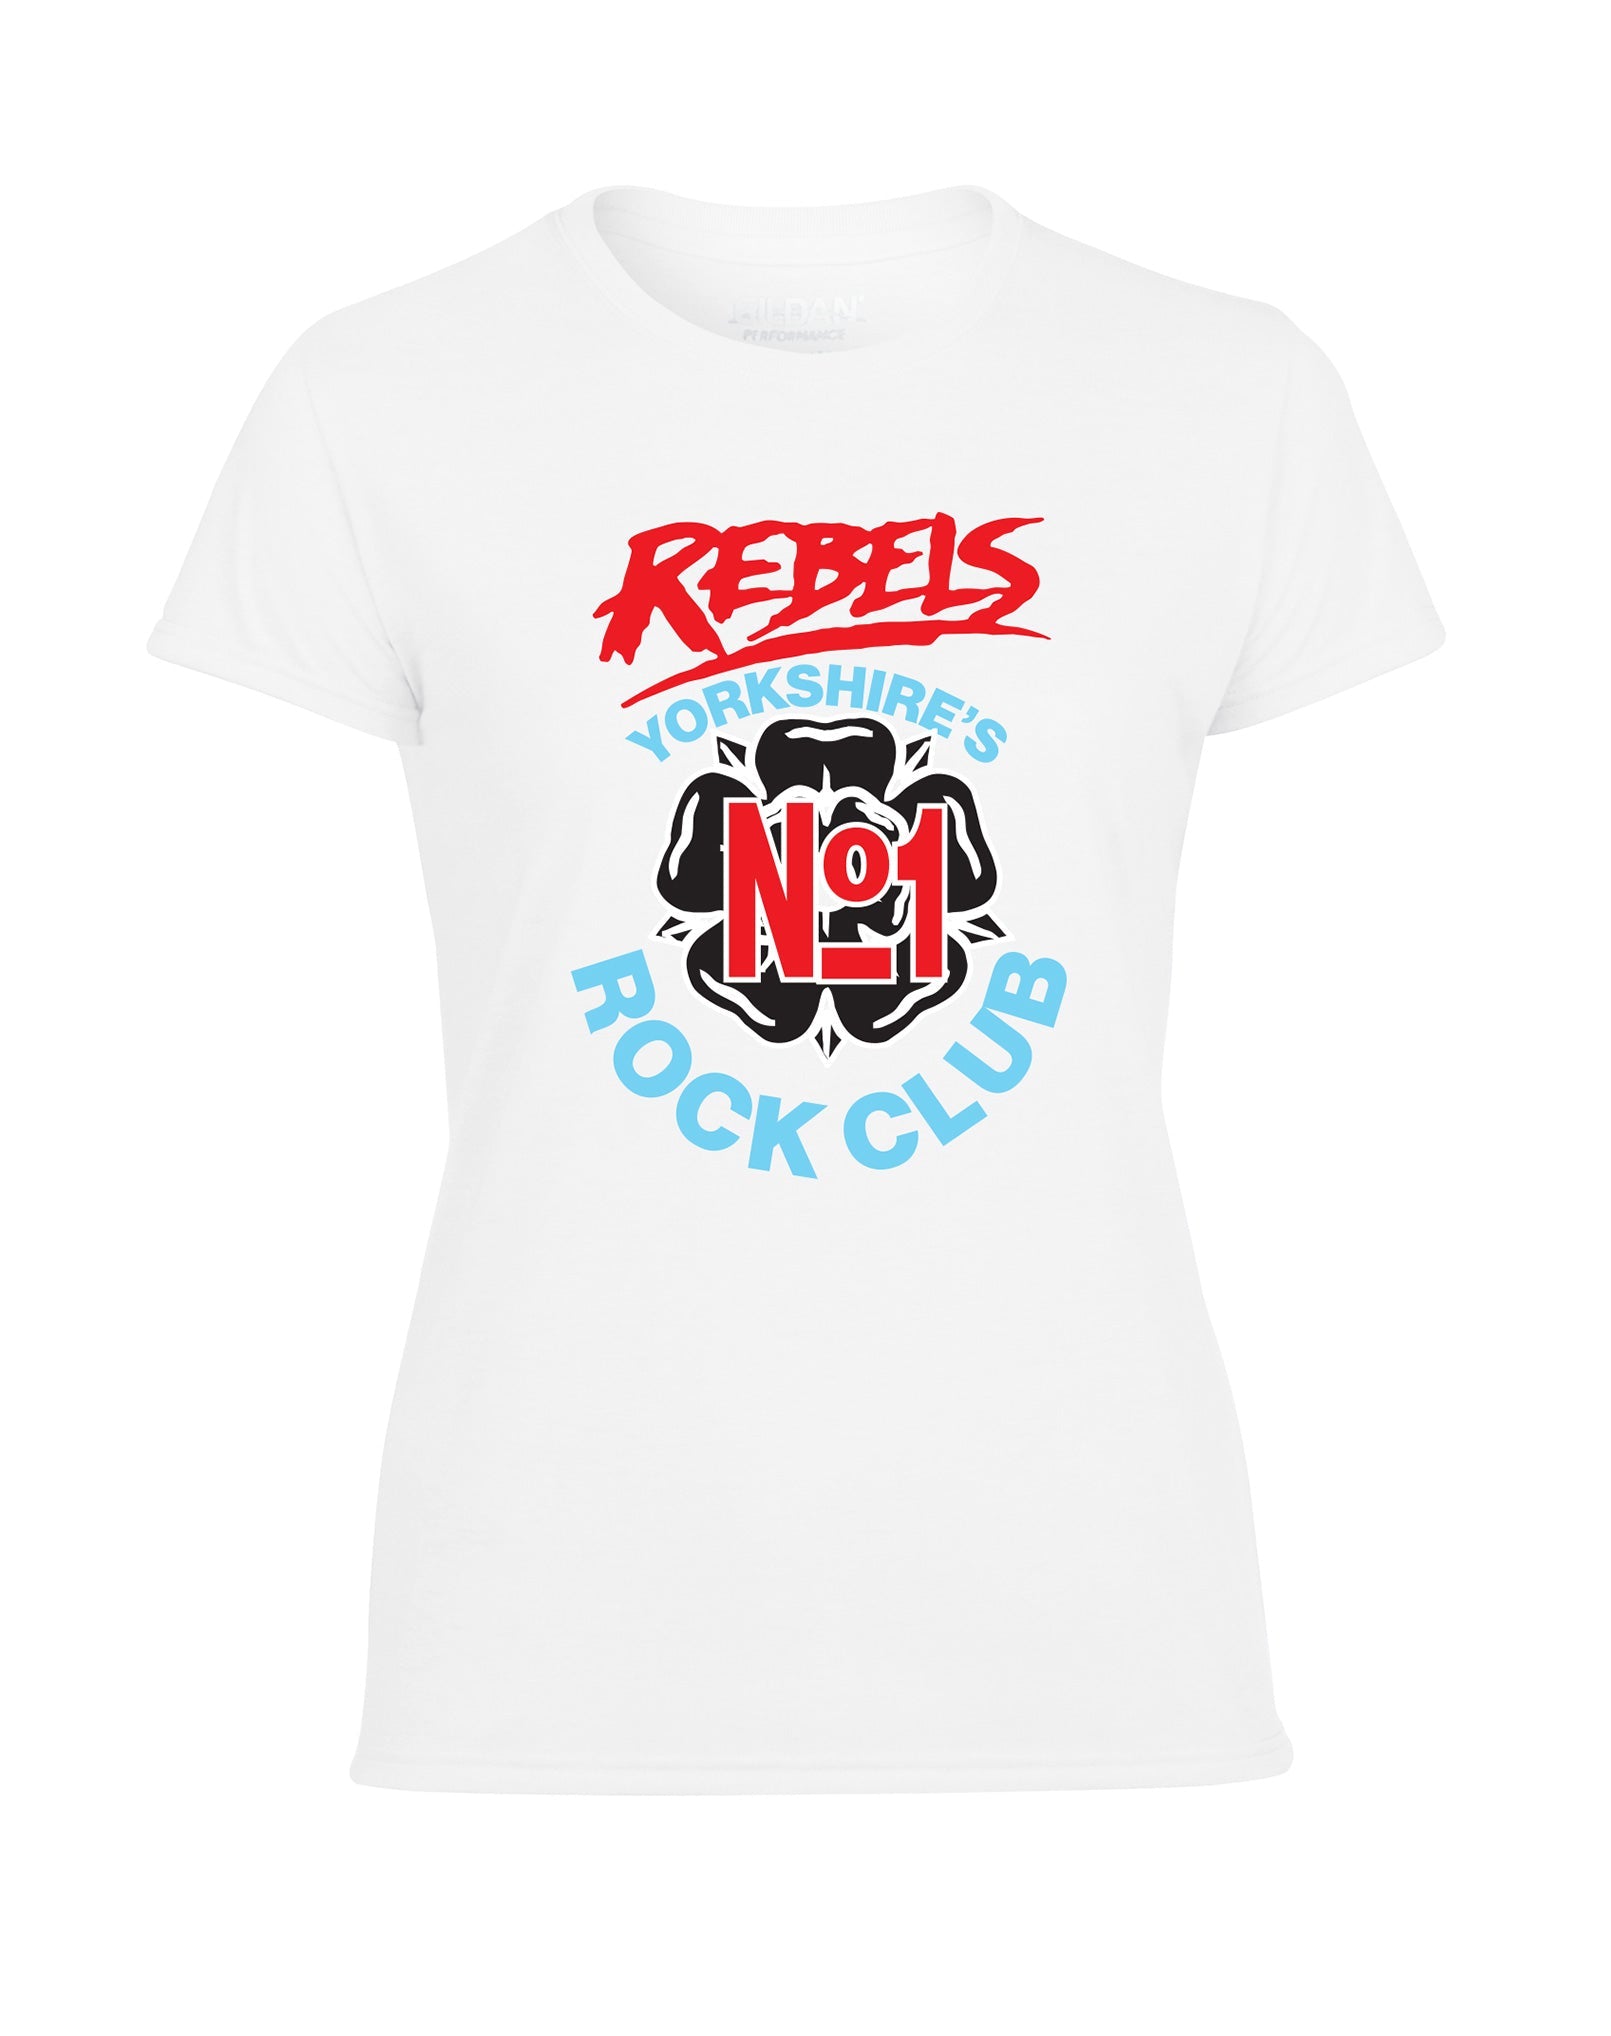 Rebels No. 1 rock club ladies fit T-shirt - various colours - Dirty Stop Outs